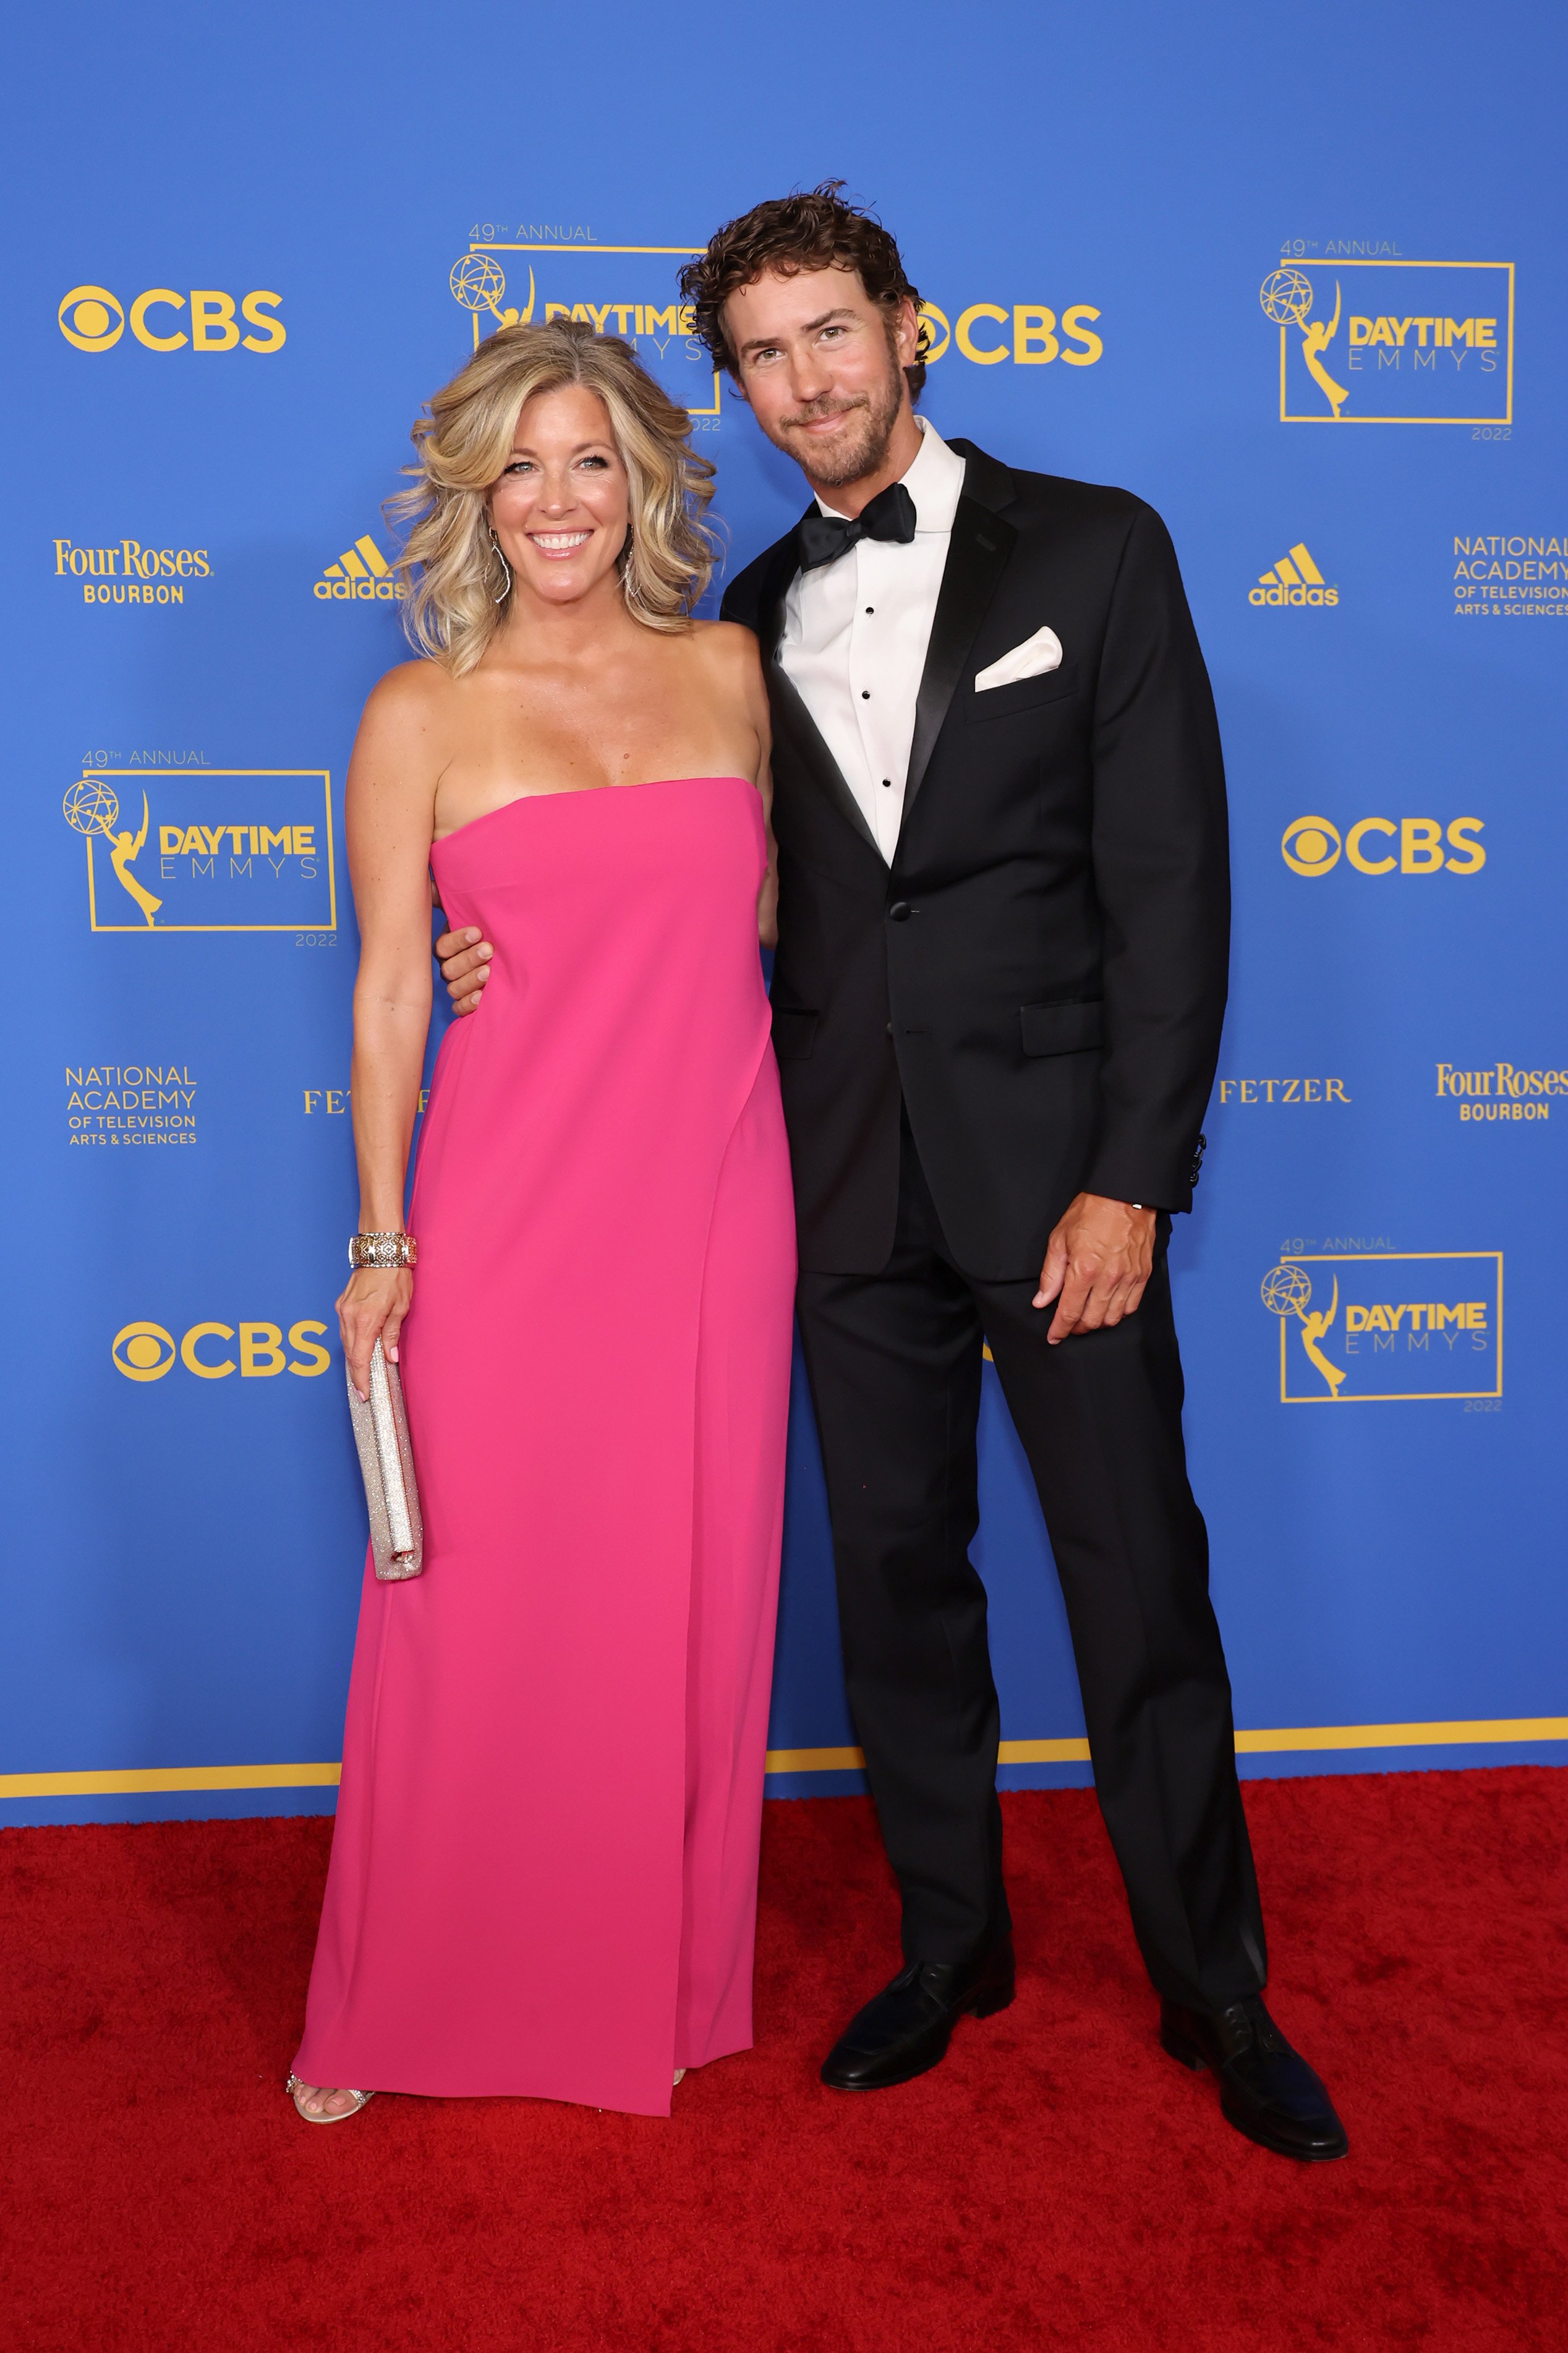 Laura Wright and Wes Ramsey at the 49th Daytime Emmy Awards in June 2022, in Pasadena. | Source: Getty Images